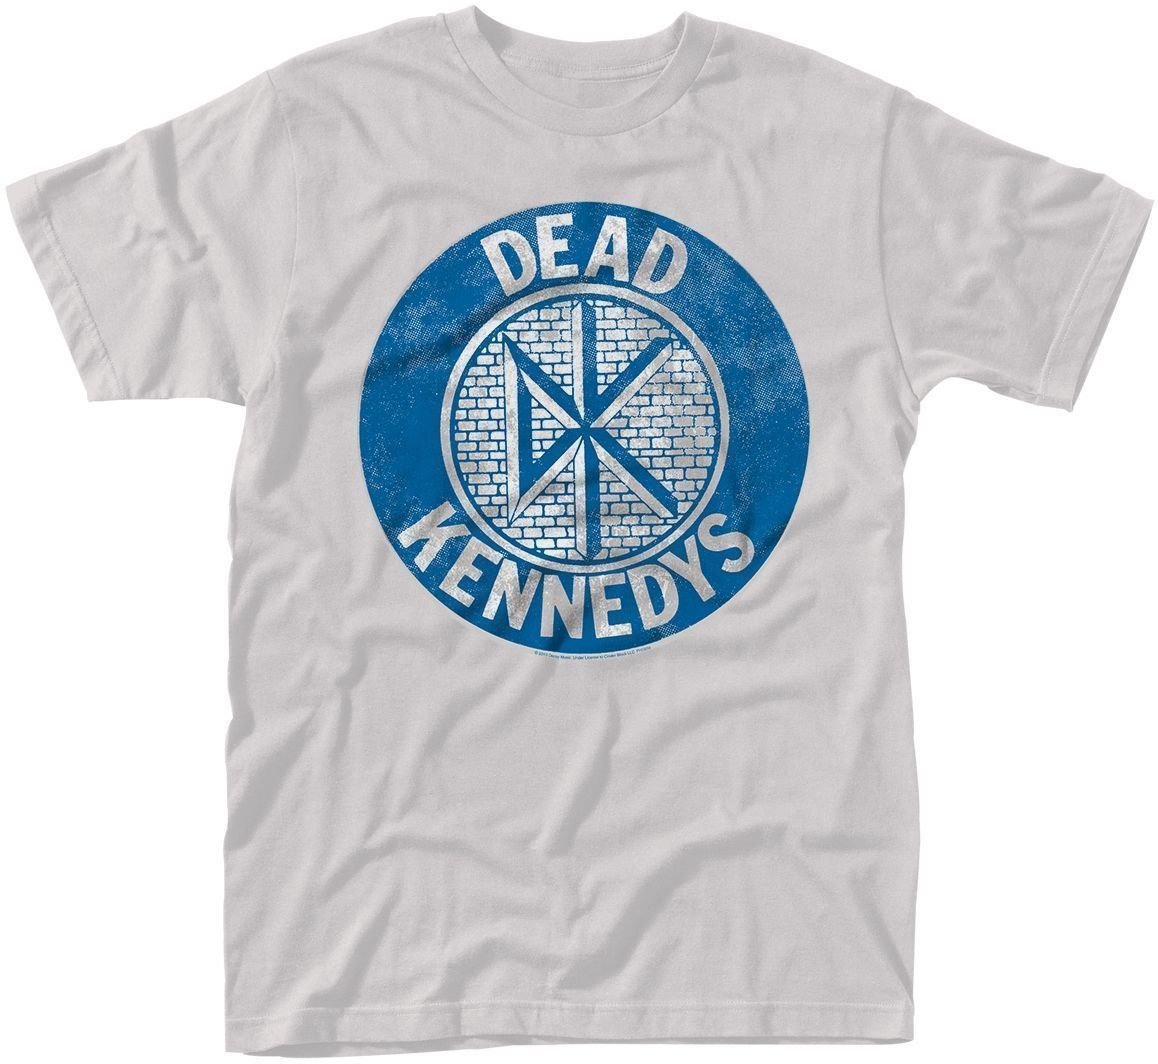 T-shirt Dead Kennedys T-shirt Bedtime For Democracy Masculino White L